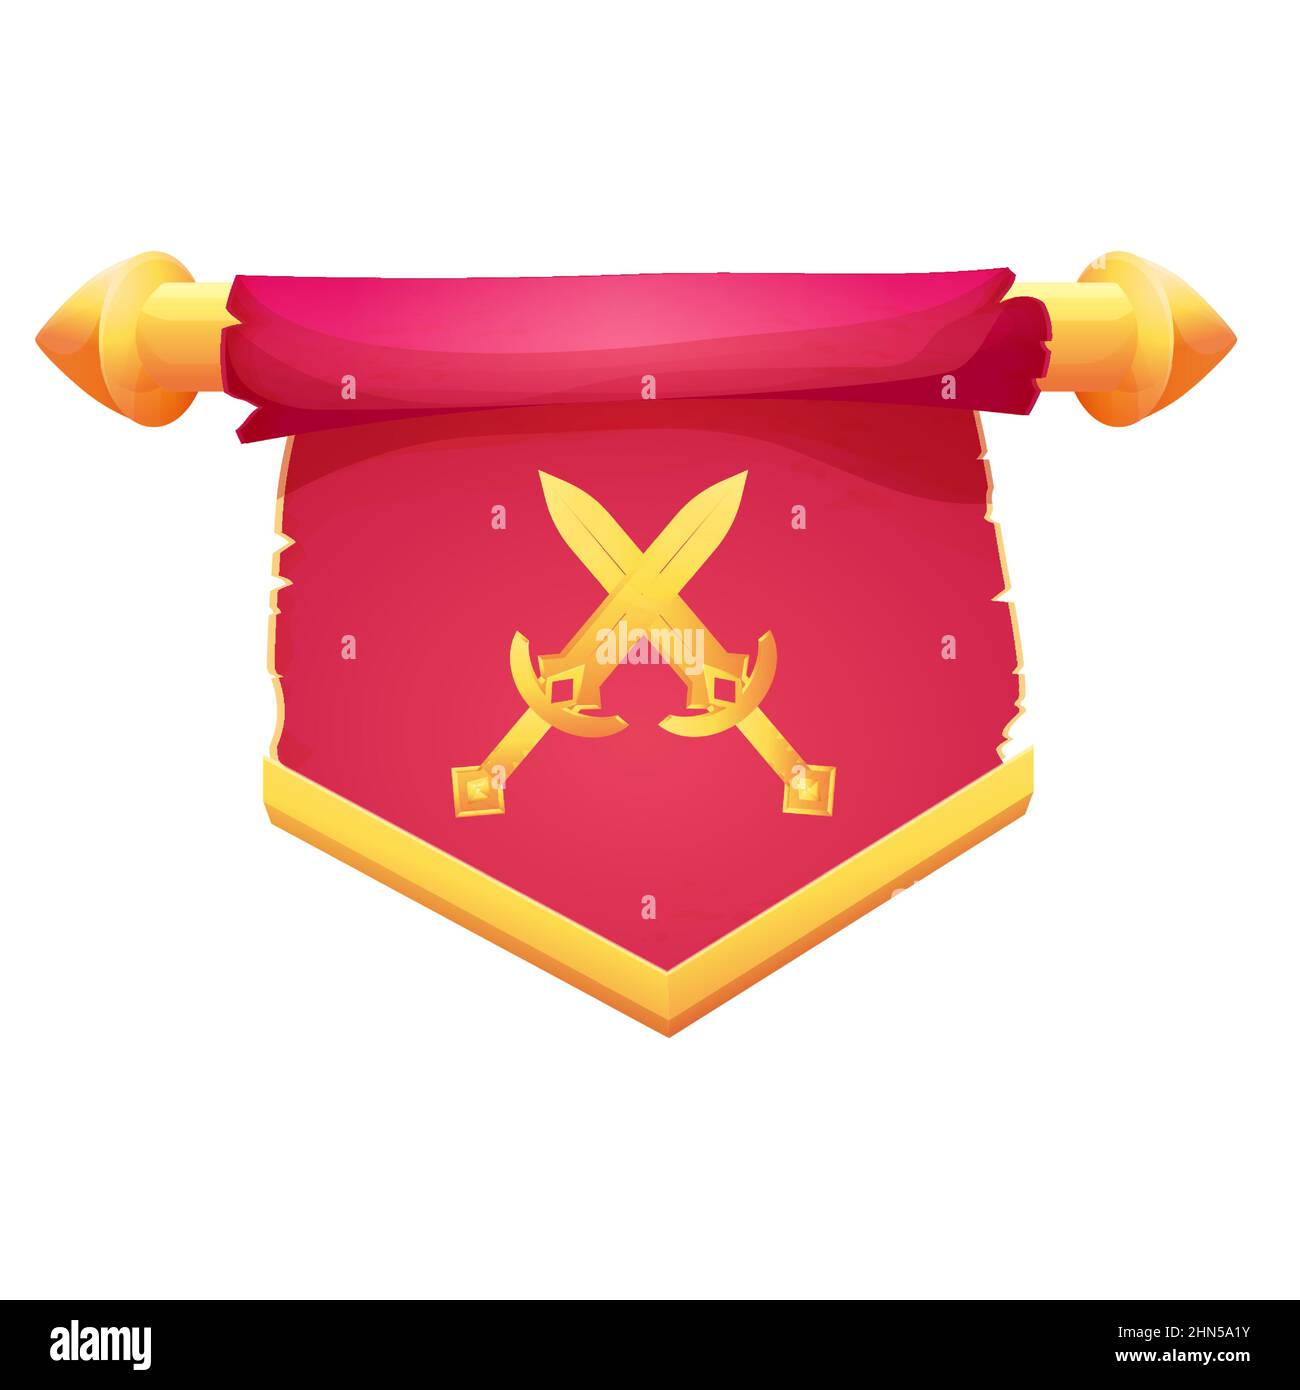 Red hanging medieval banner flag with cloth texture, golden decoration and swords in cartoon style isolated on white background. Ui game asset, heraldic design element,. Vector illustration Stock Vector